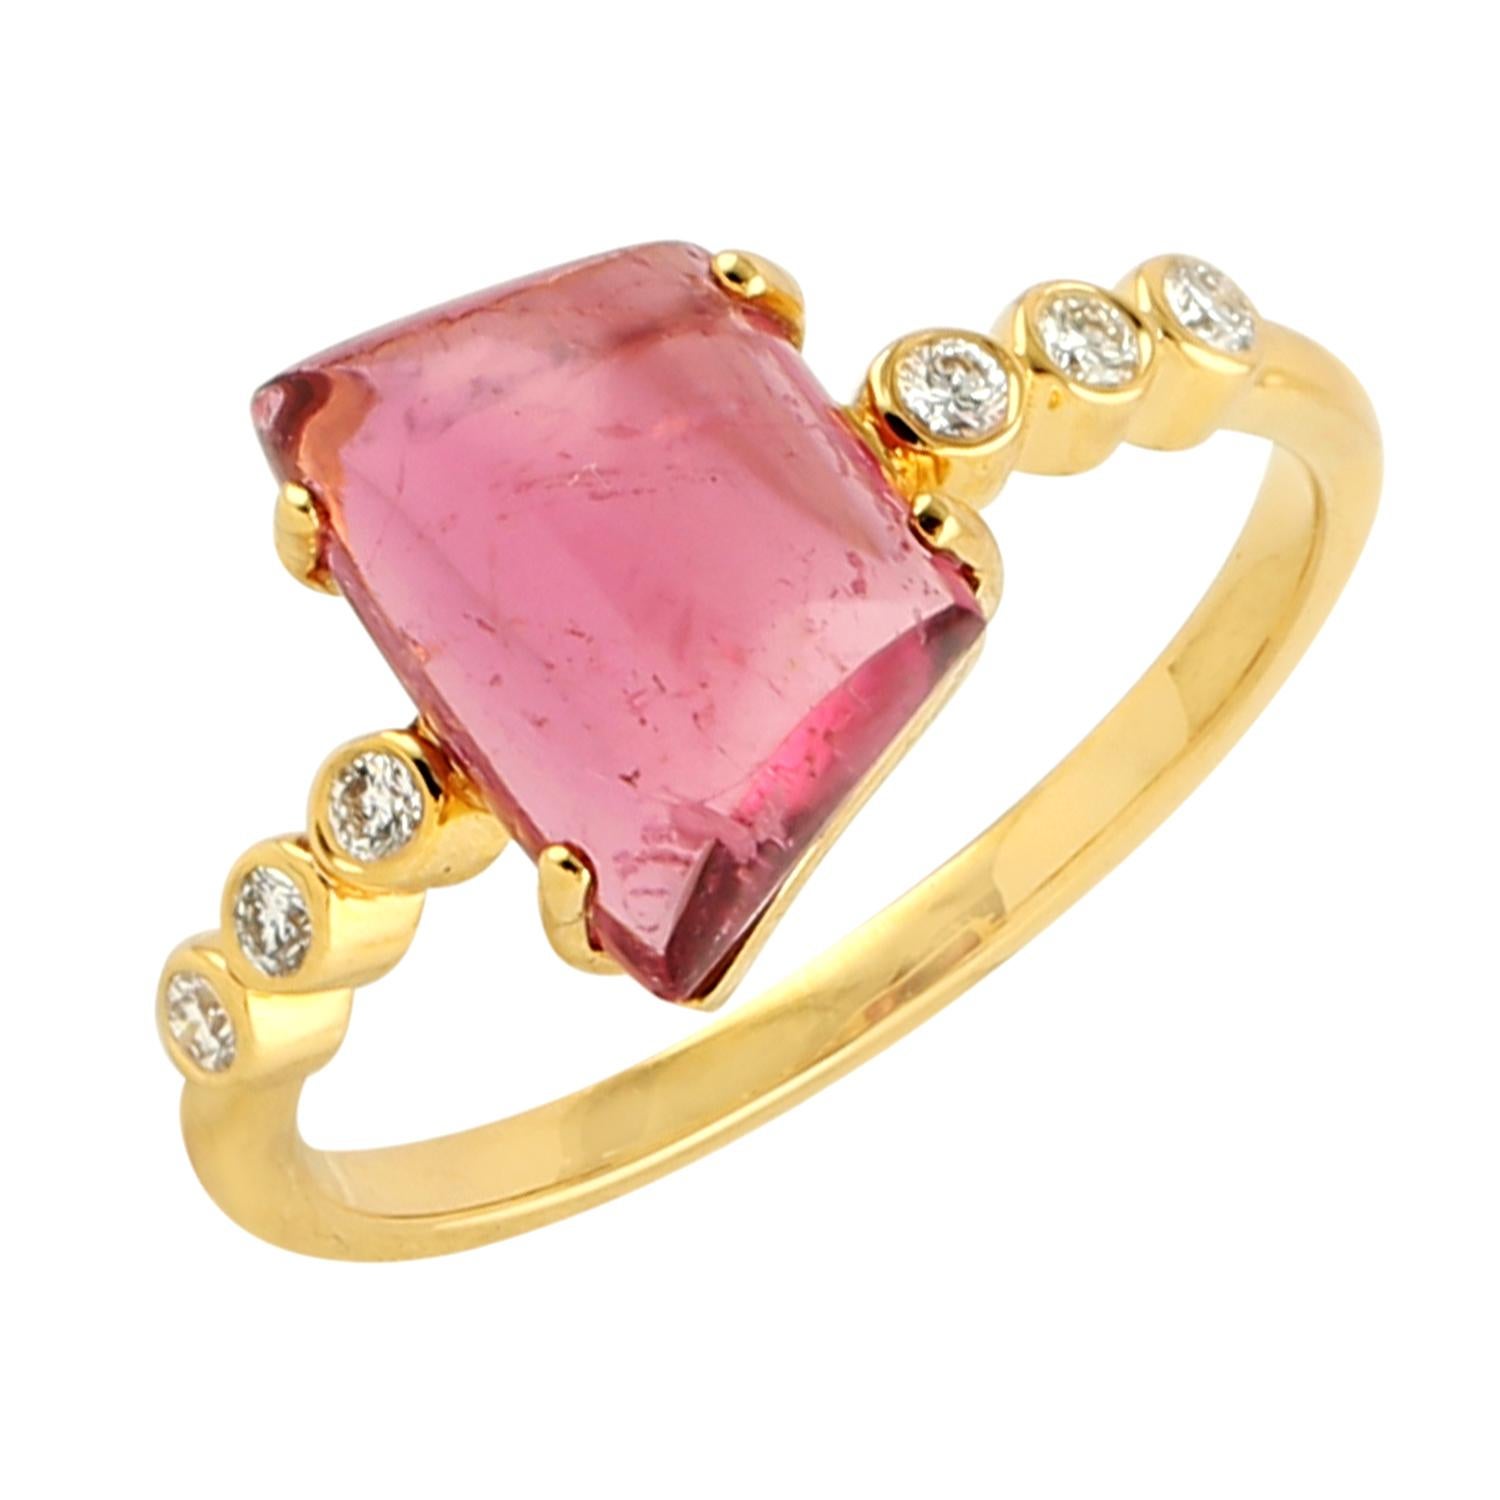 Pink Tourmaline Cocktail Ring With Diamonds In Bezel Settings In 18k Gold In New Condition For Sale In New York, NY